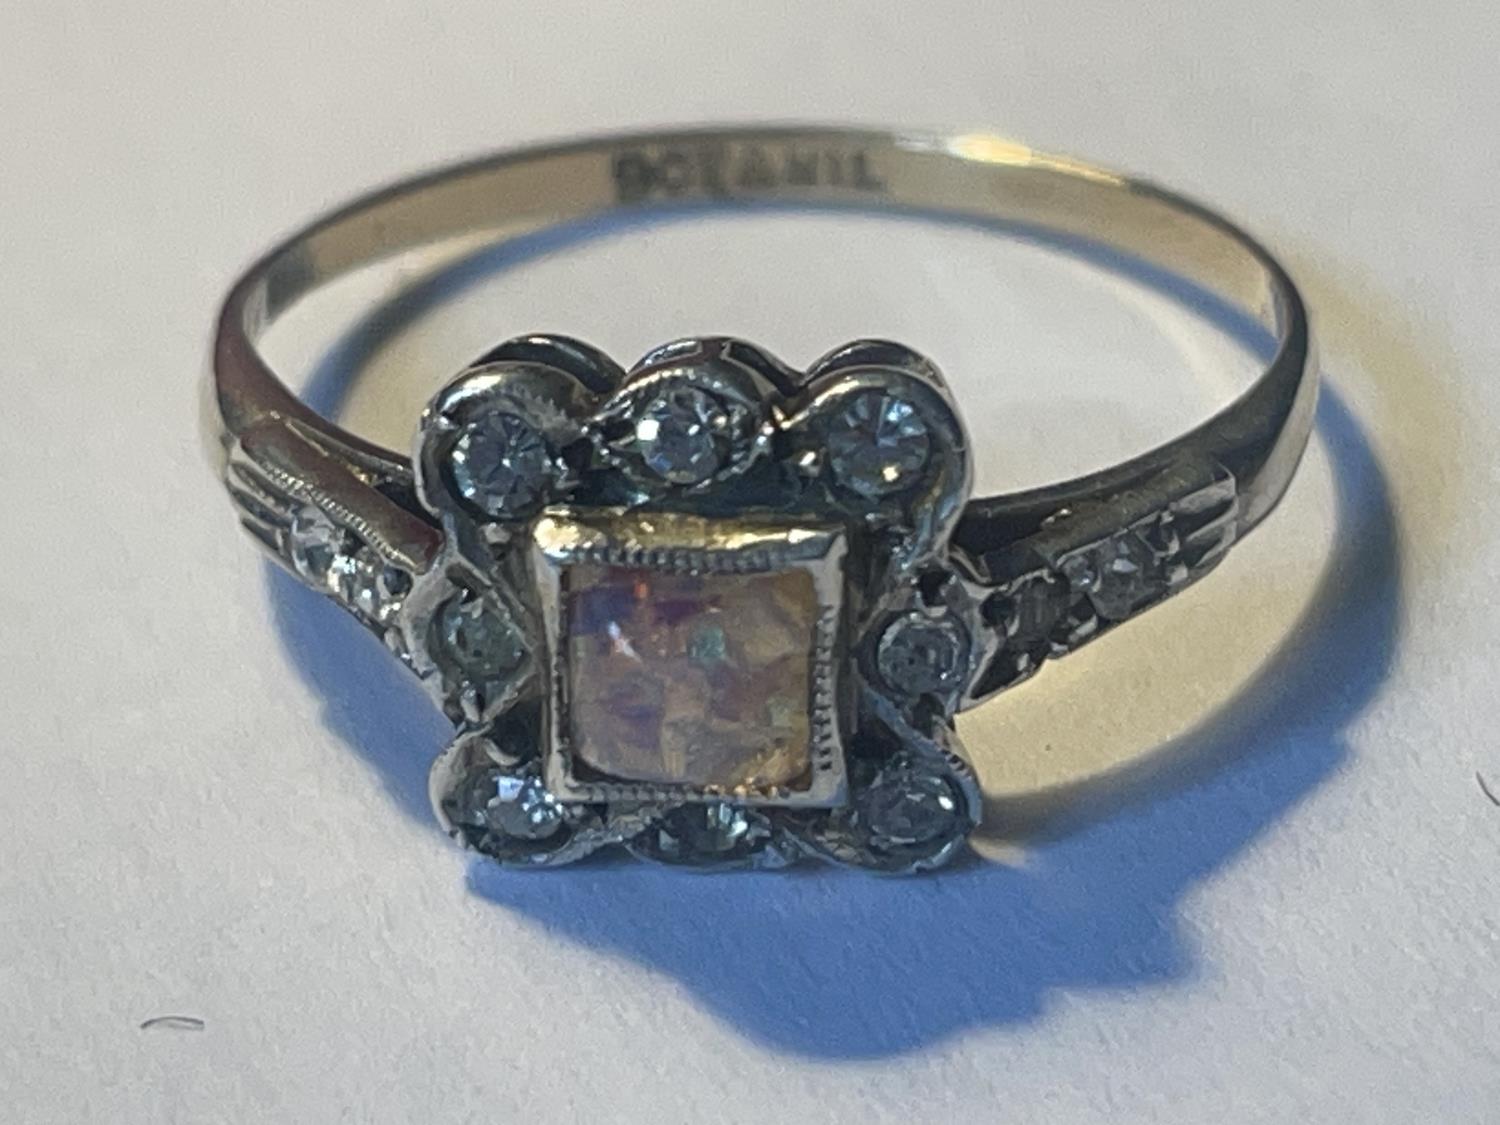 A SILVER AND 9 CARAT GOLD VICTORIAN DRESS RING IN A PRESENTATION BOX - Image 2 of 4